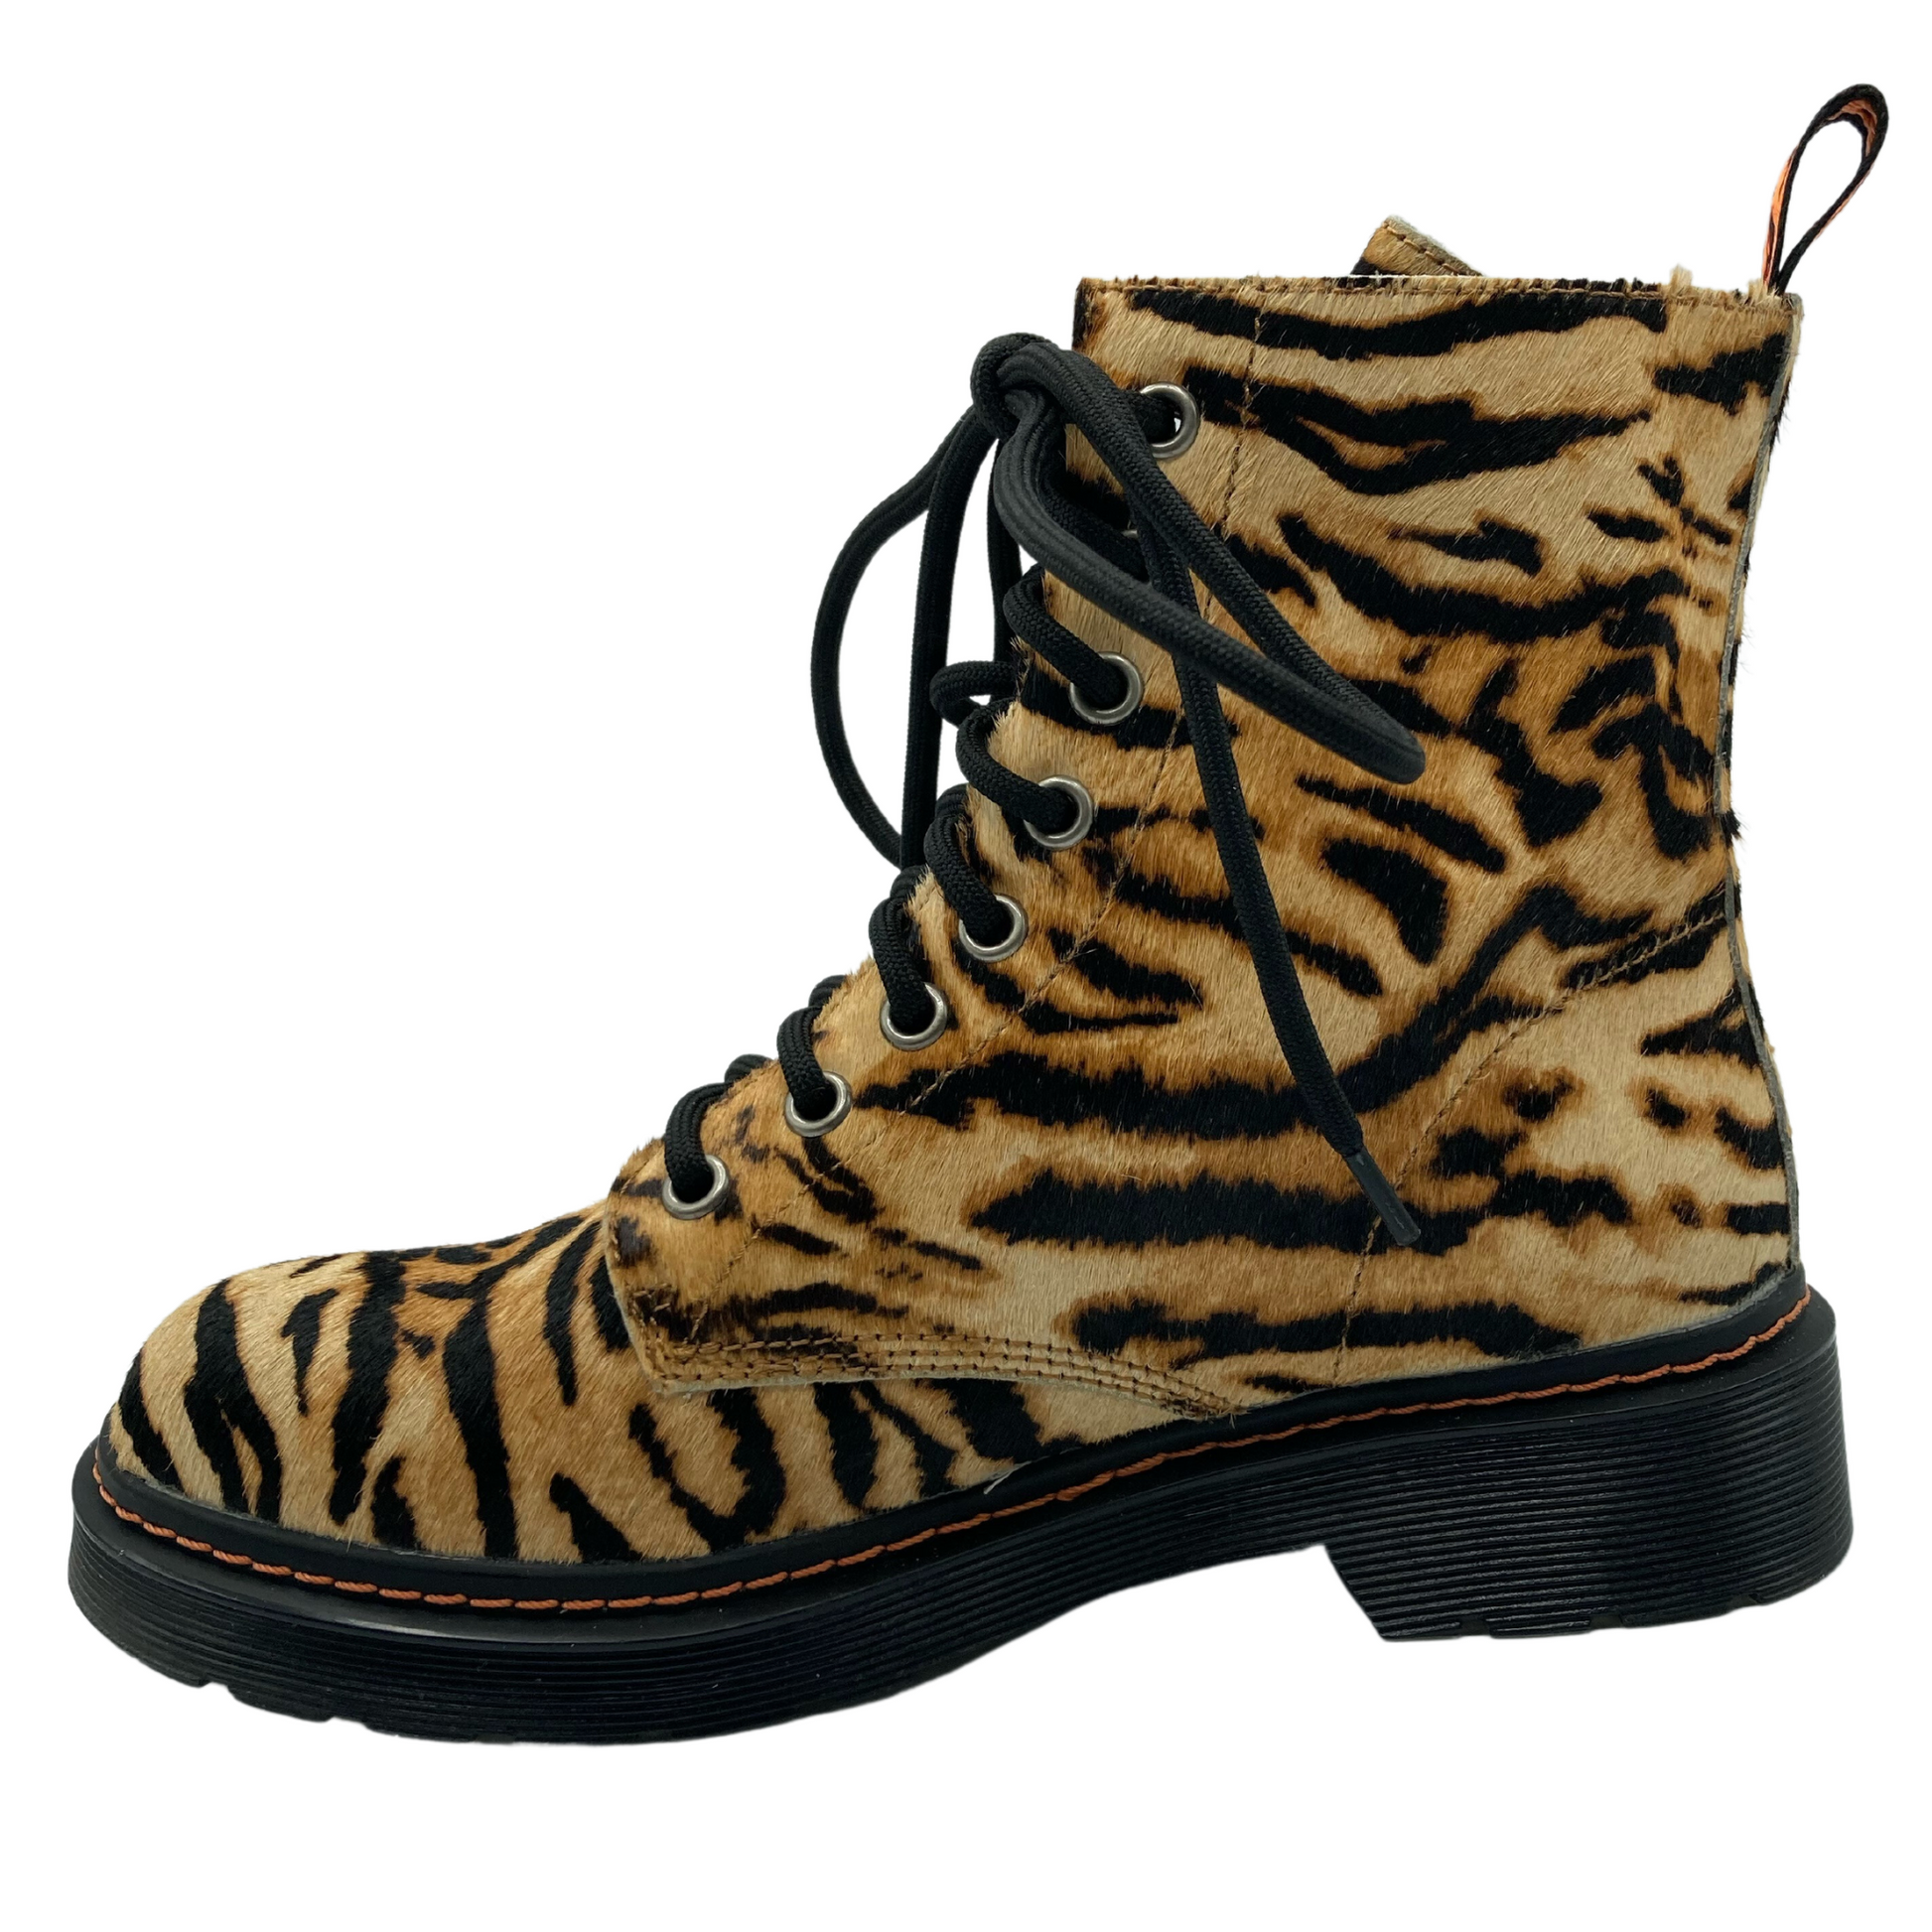 Left facing view of tiger print leather combat boot with black rubber outsole